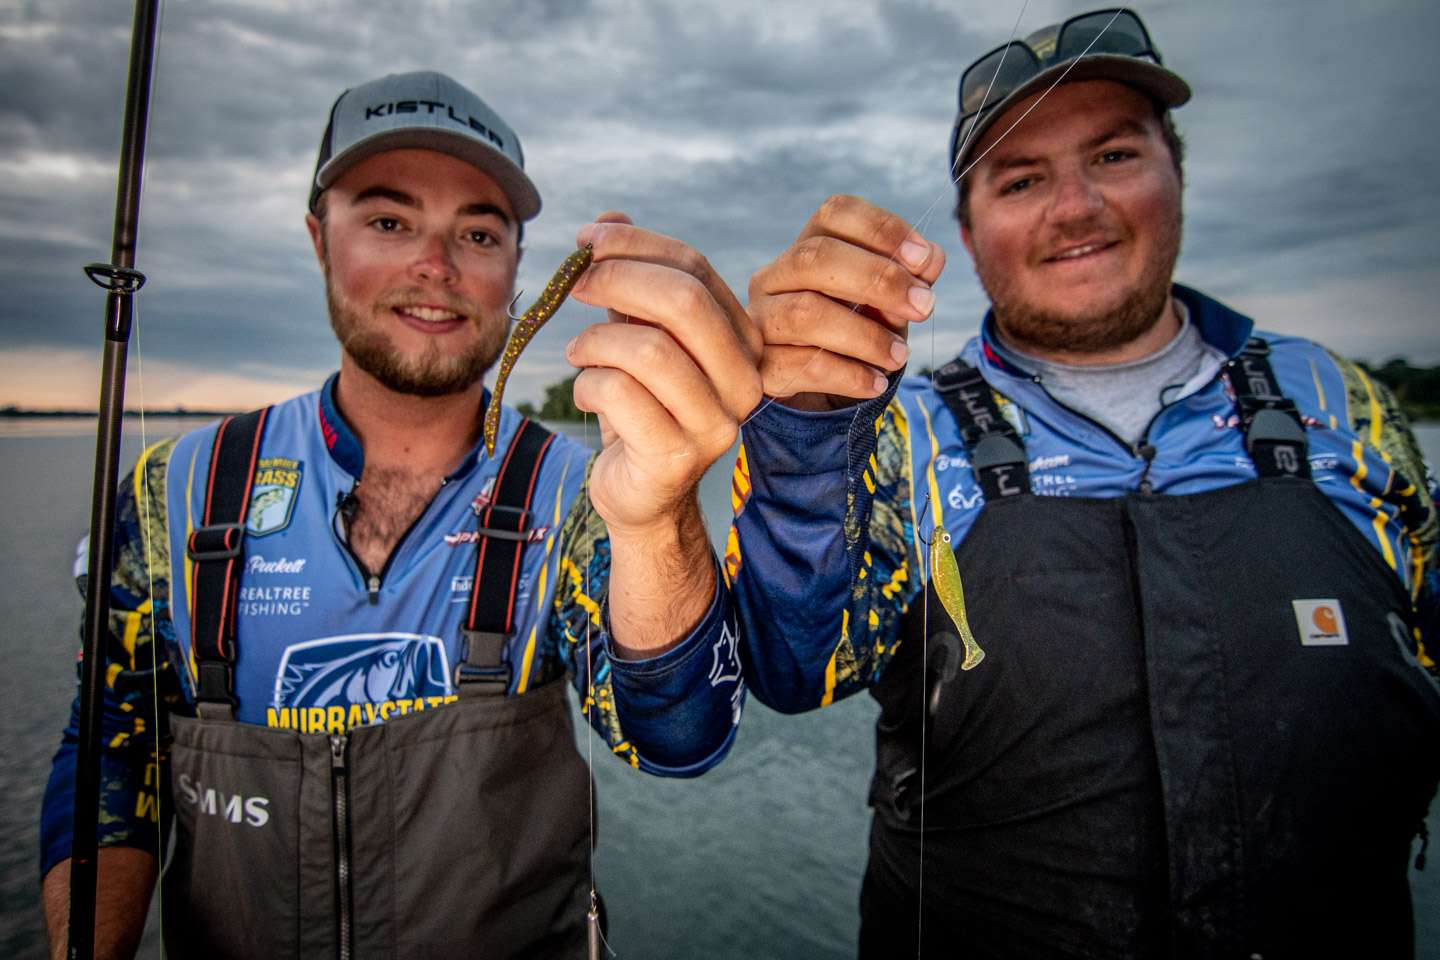 Puckett and Bingham alternated between a Berkley Powerbait Maxscent Flat Worm and a Megabass Hazedong swimbait on a drop shot, rigged with a 1/2-ounce weight. 